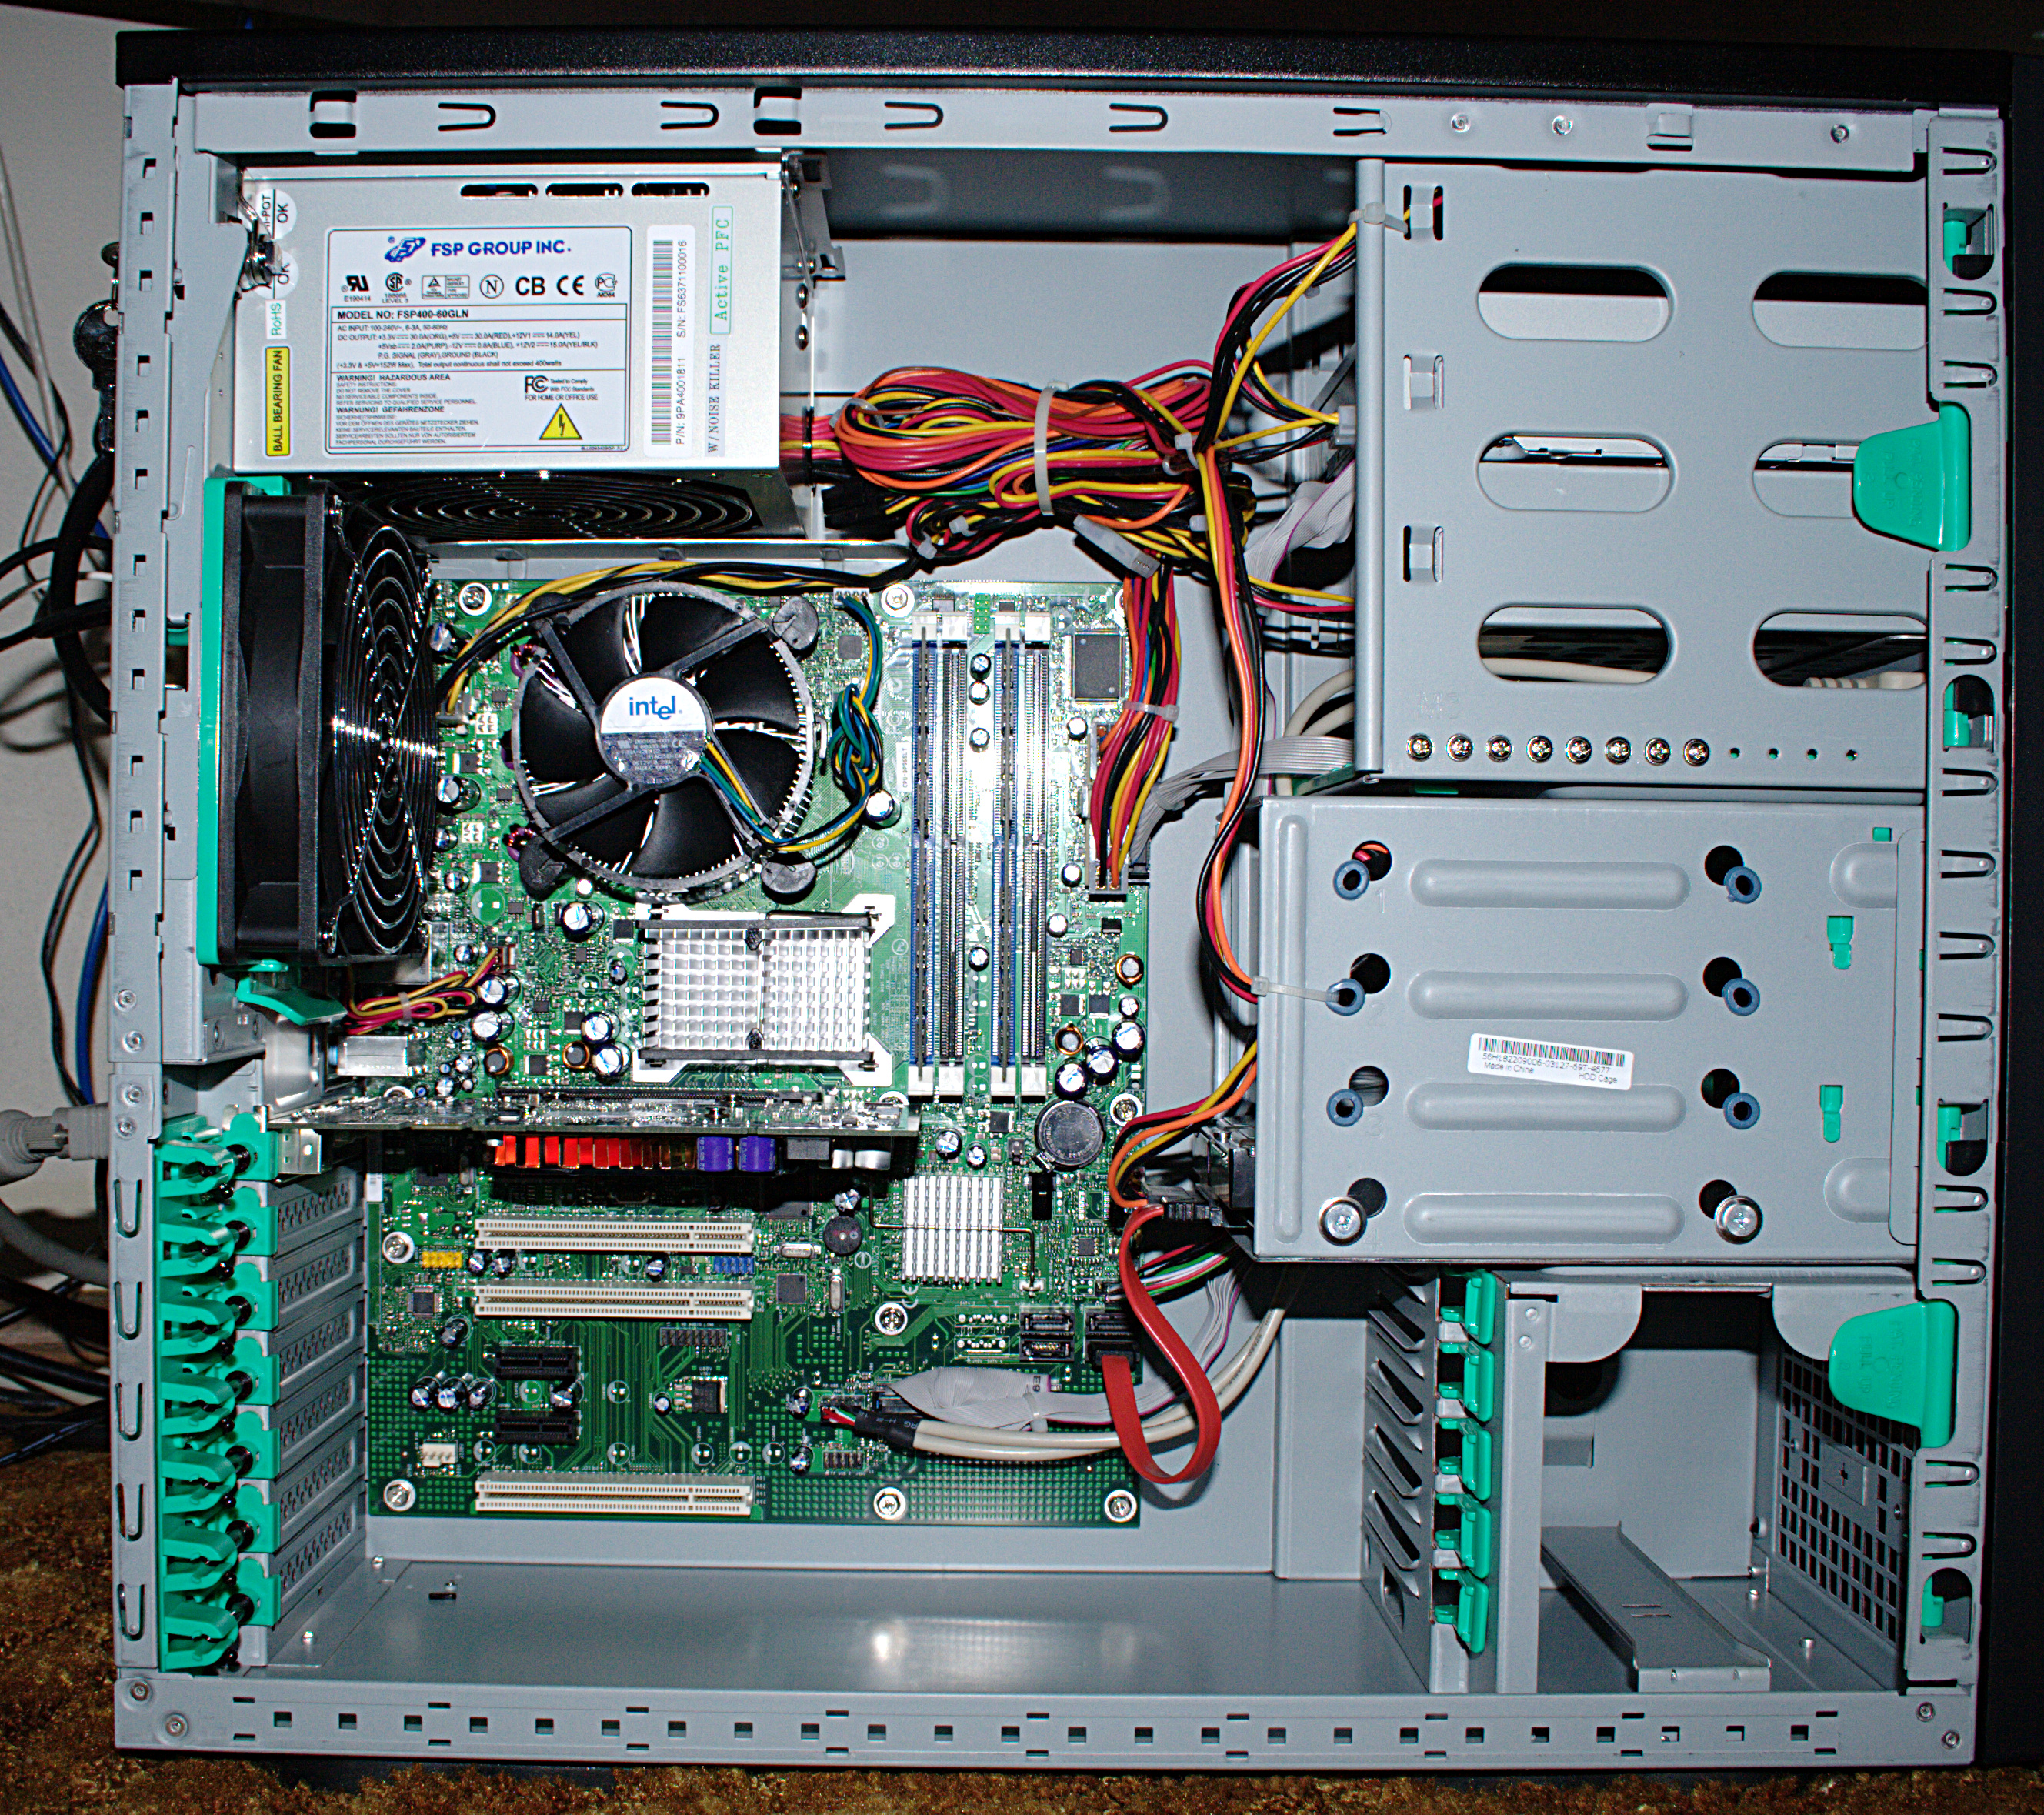 Inside The Computer | photo page - everystockphoto